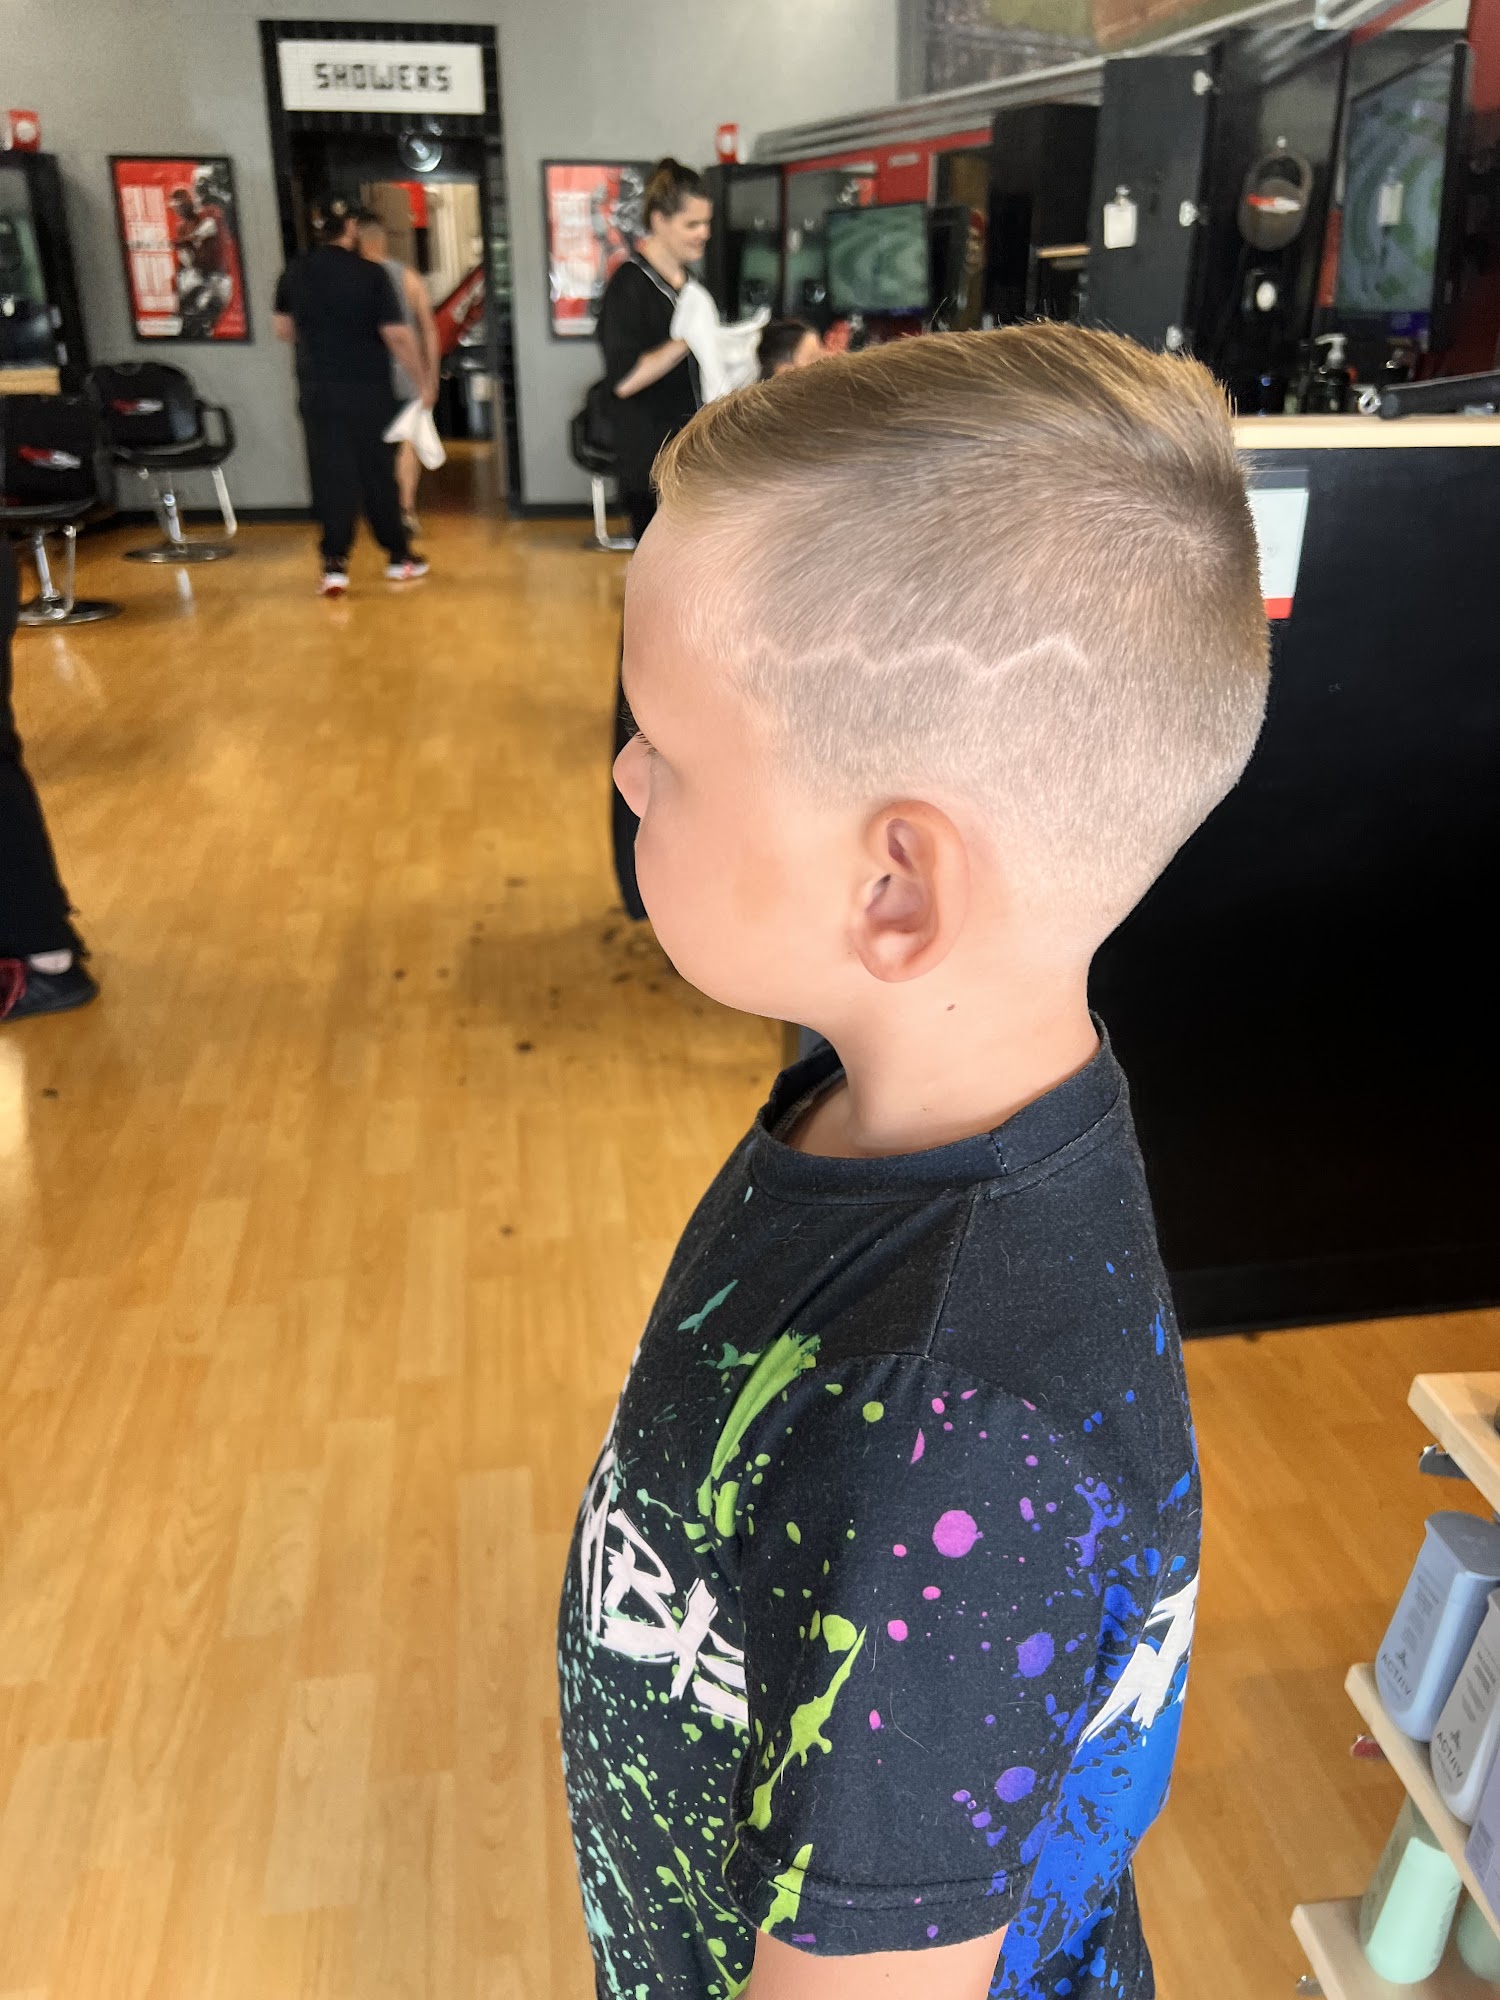 Sport Clips Haircuts of Grove City 225 Westside Square Dr, Mercer Pennsylvania 16137